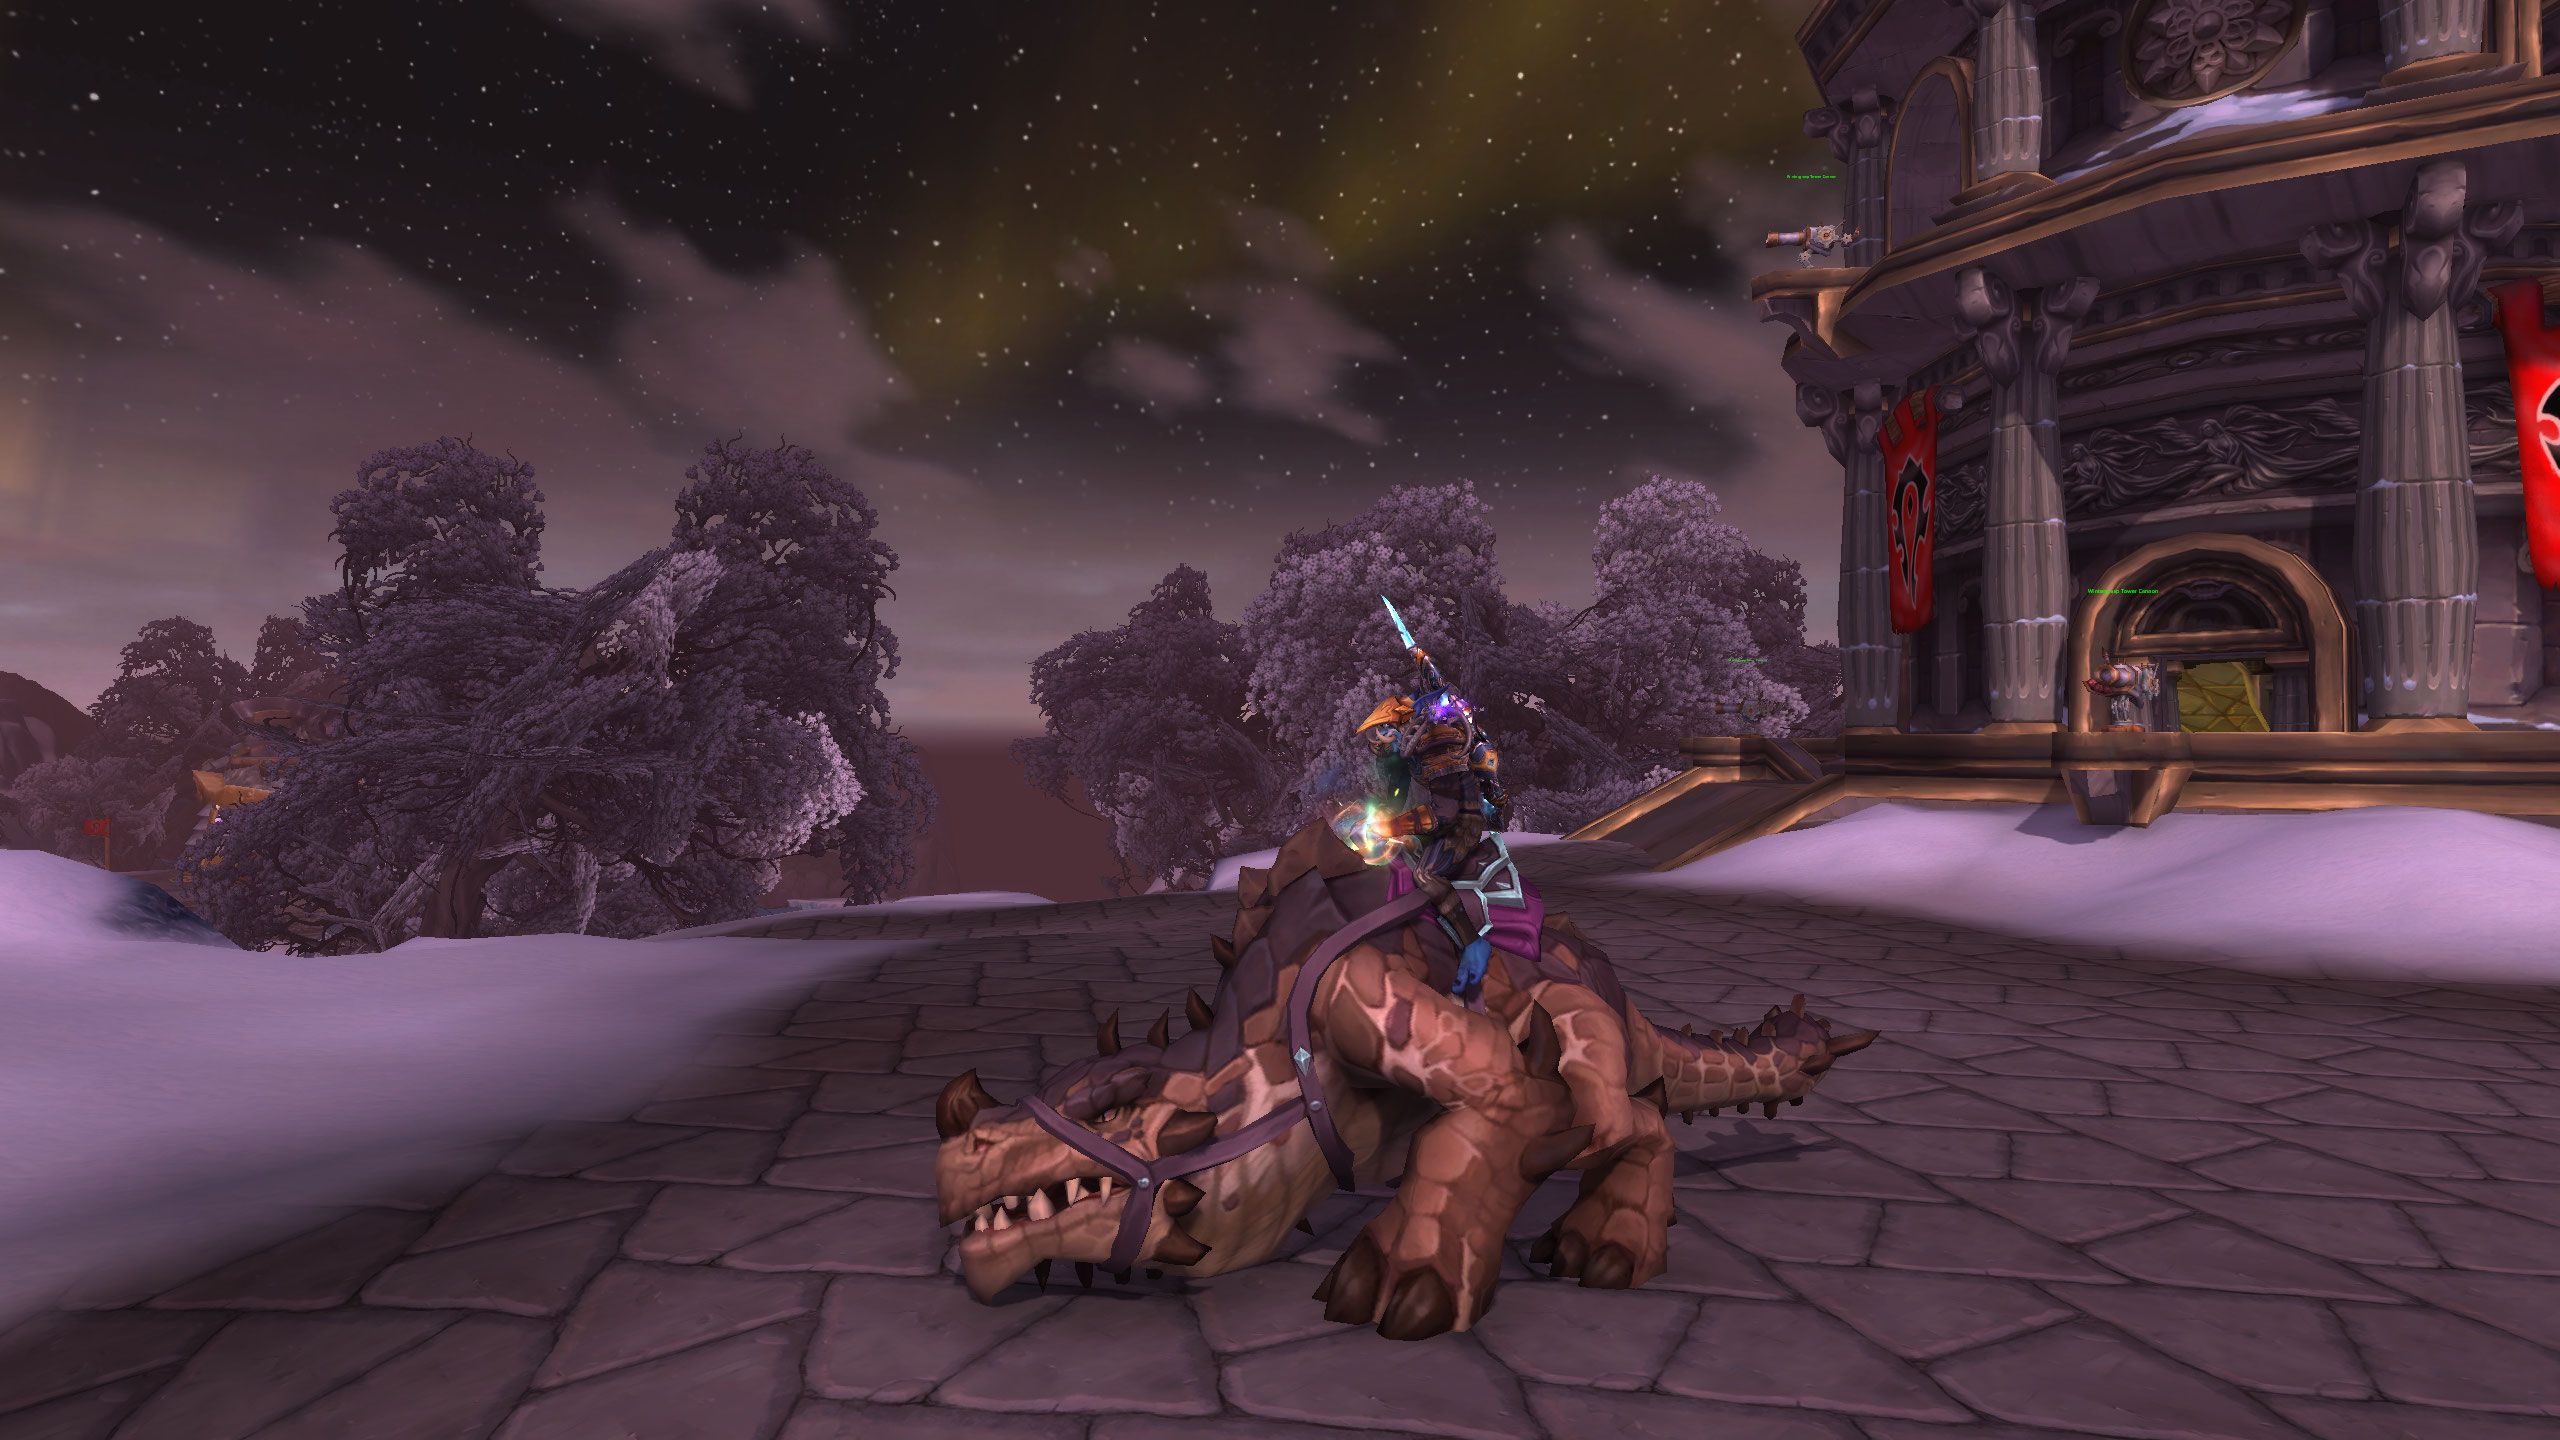 WoW Lizi, Thunderspine trampler mount in alterac valley